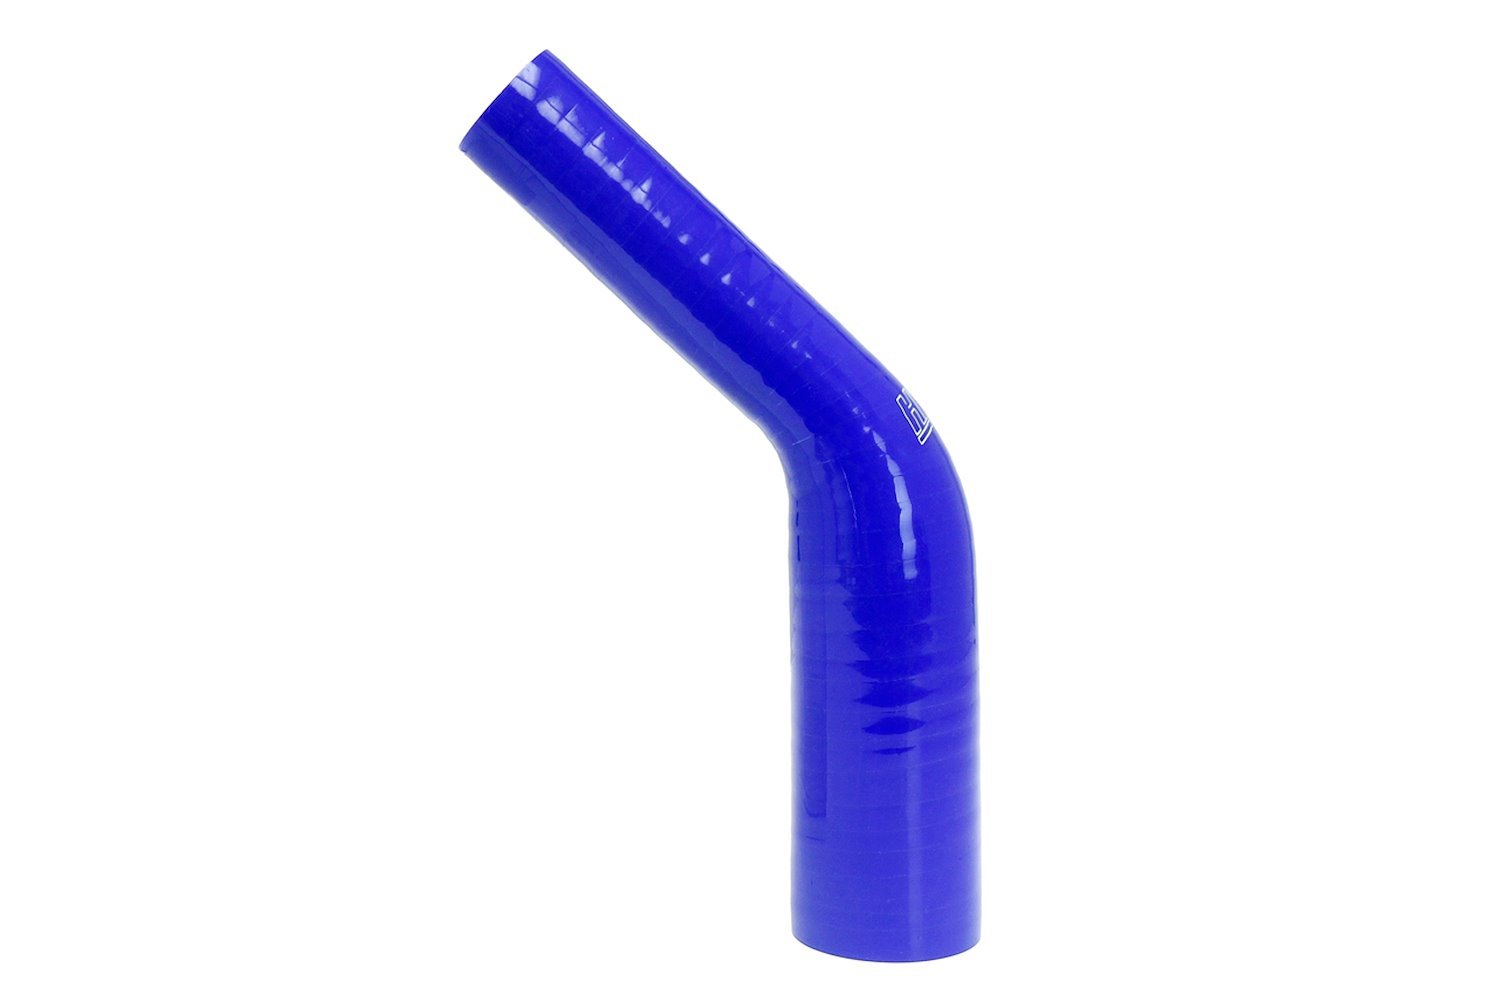 HTSER45-150-200-BLUE Silicone 45-Degree Elbow Hose, High-Temp 4-Ply Reinforced, 1-1/2 in. - 2 in. ID, Blue